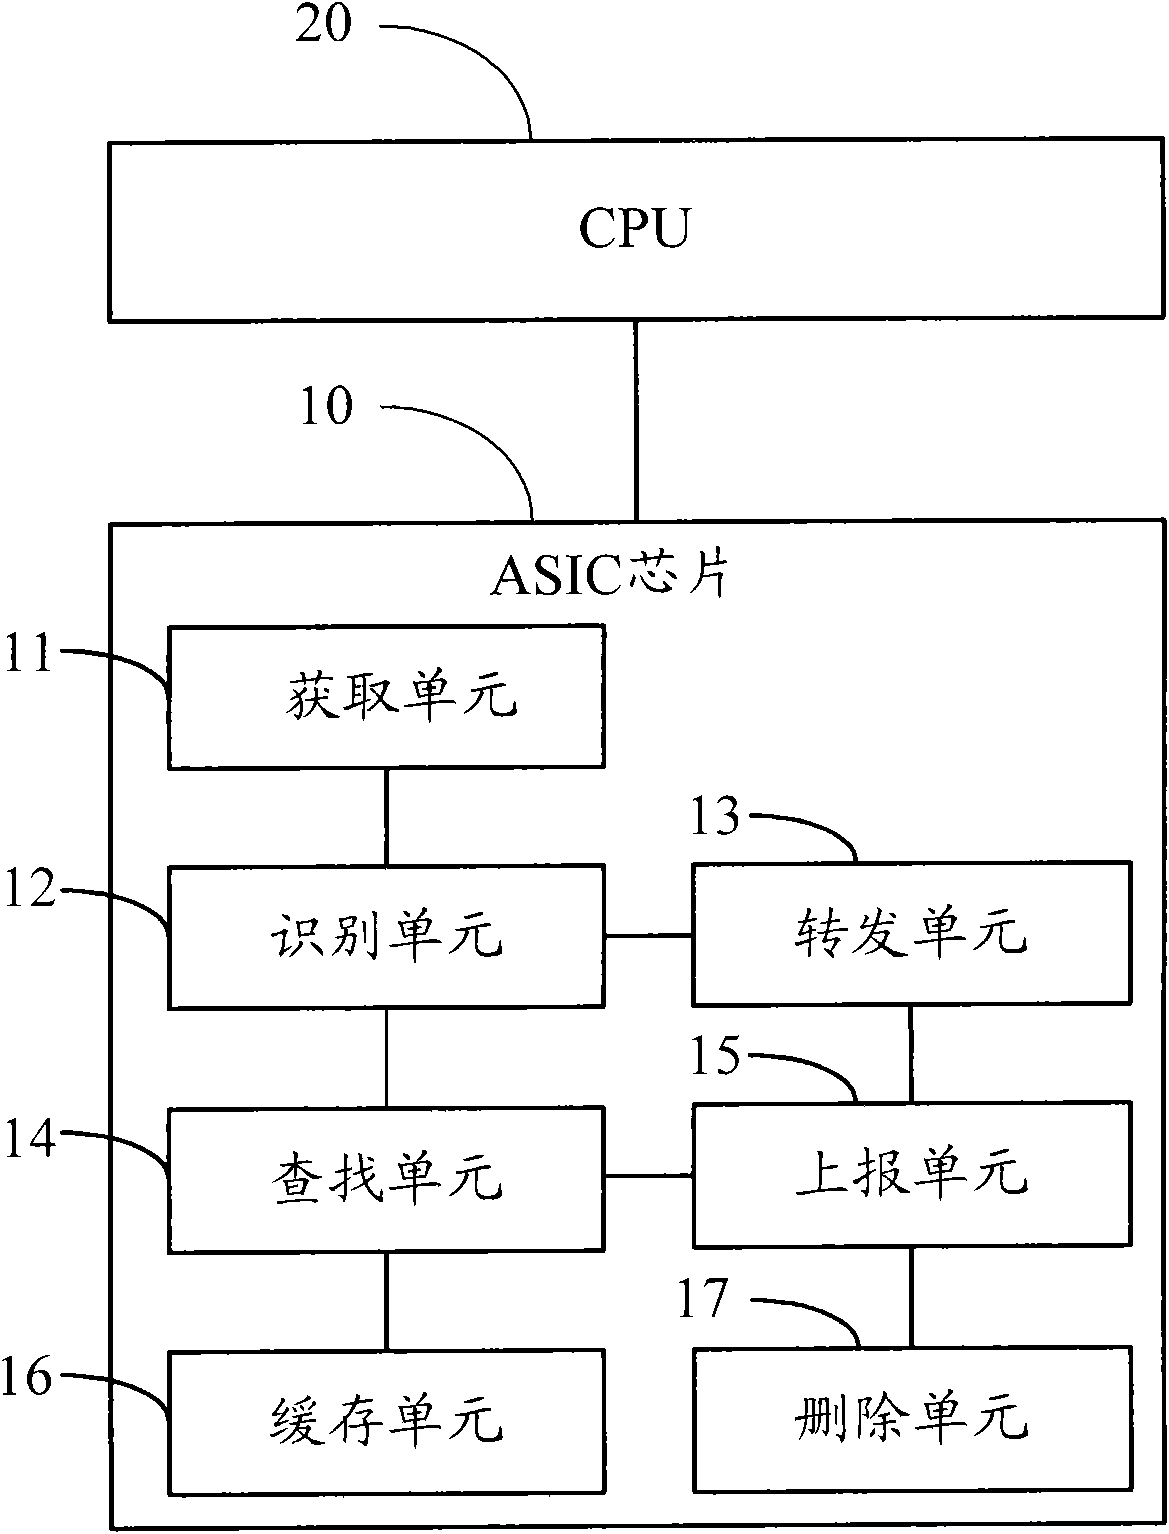 Method and equipment for preventing unknown multicast from attacking CPU (Central Processing Unit)